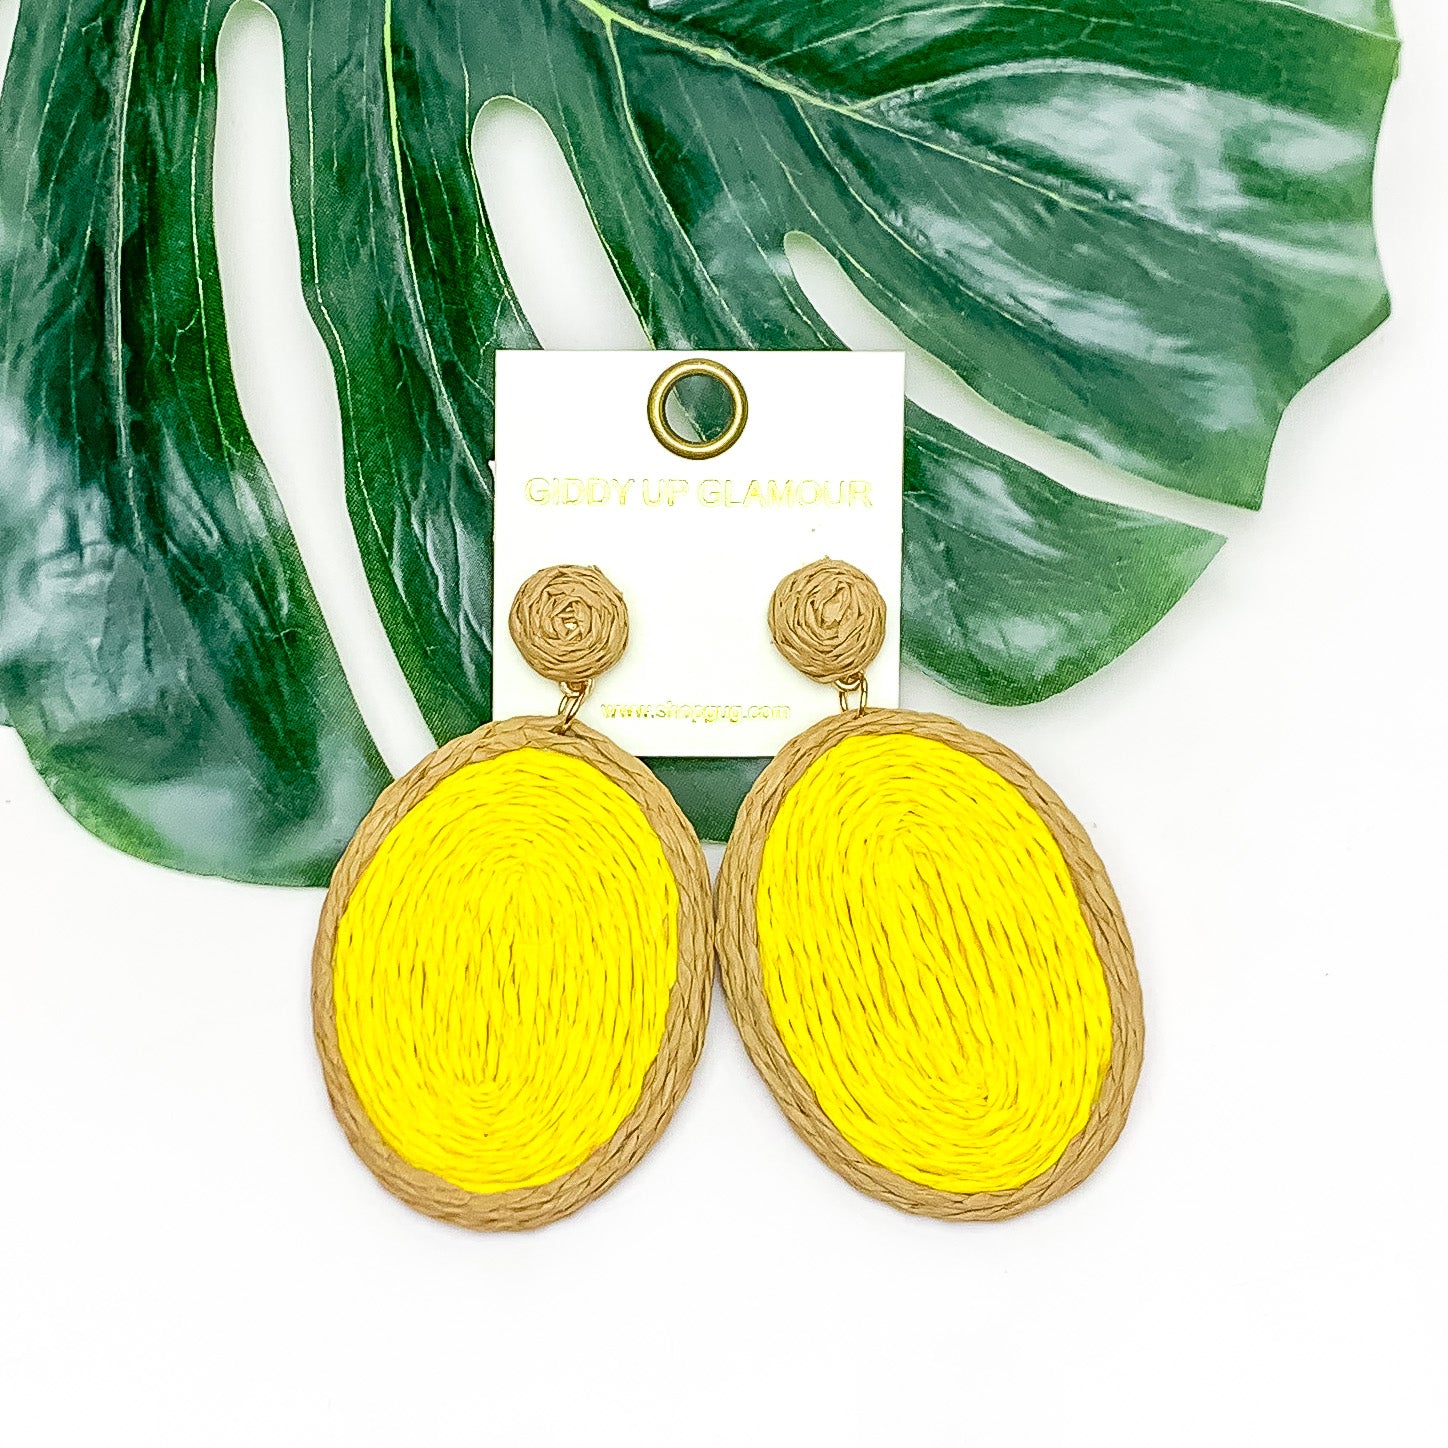 Brunch Bash Raffia Wrapped Oval Earrings in Yellow. Pictured on a white background with a large leaf behind the earrings.